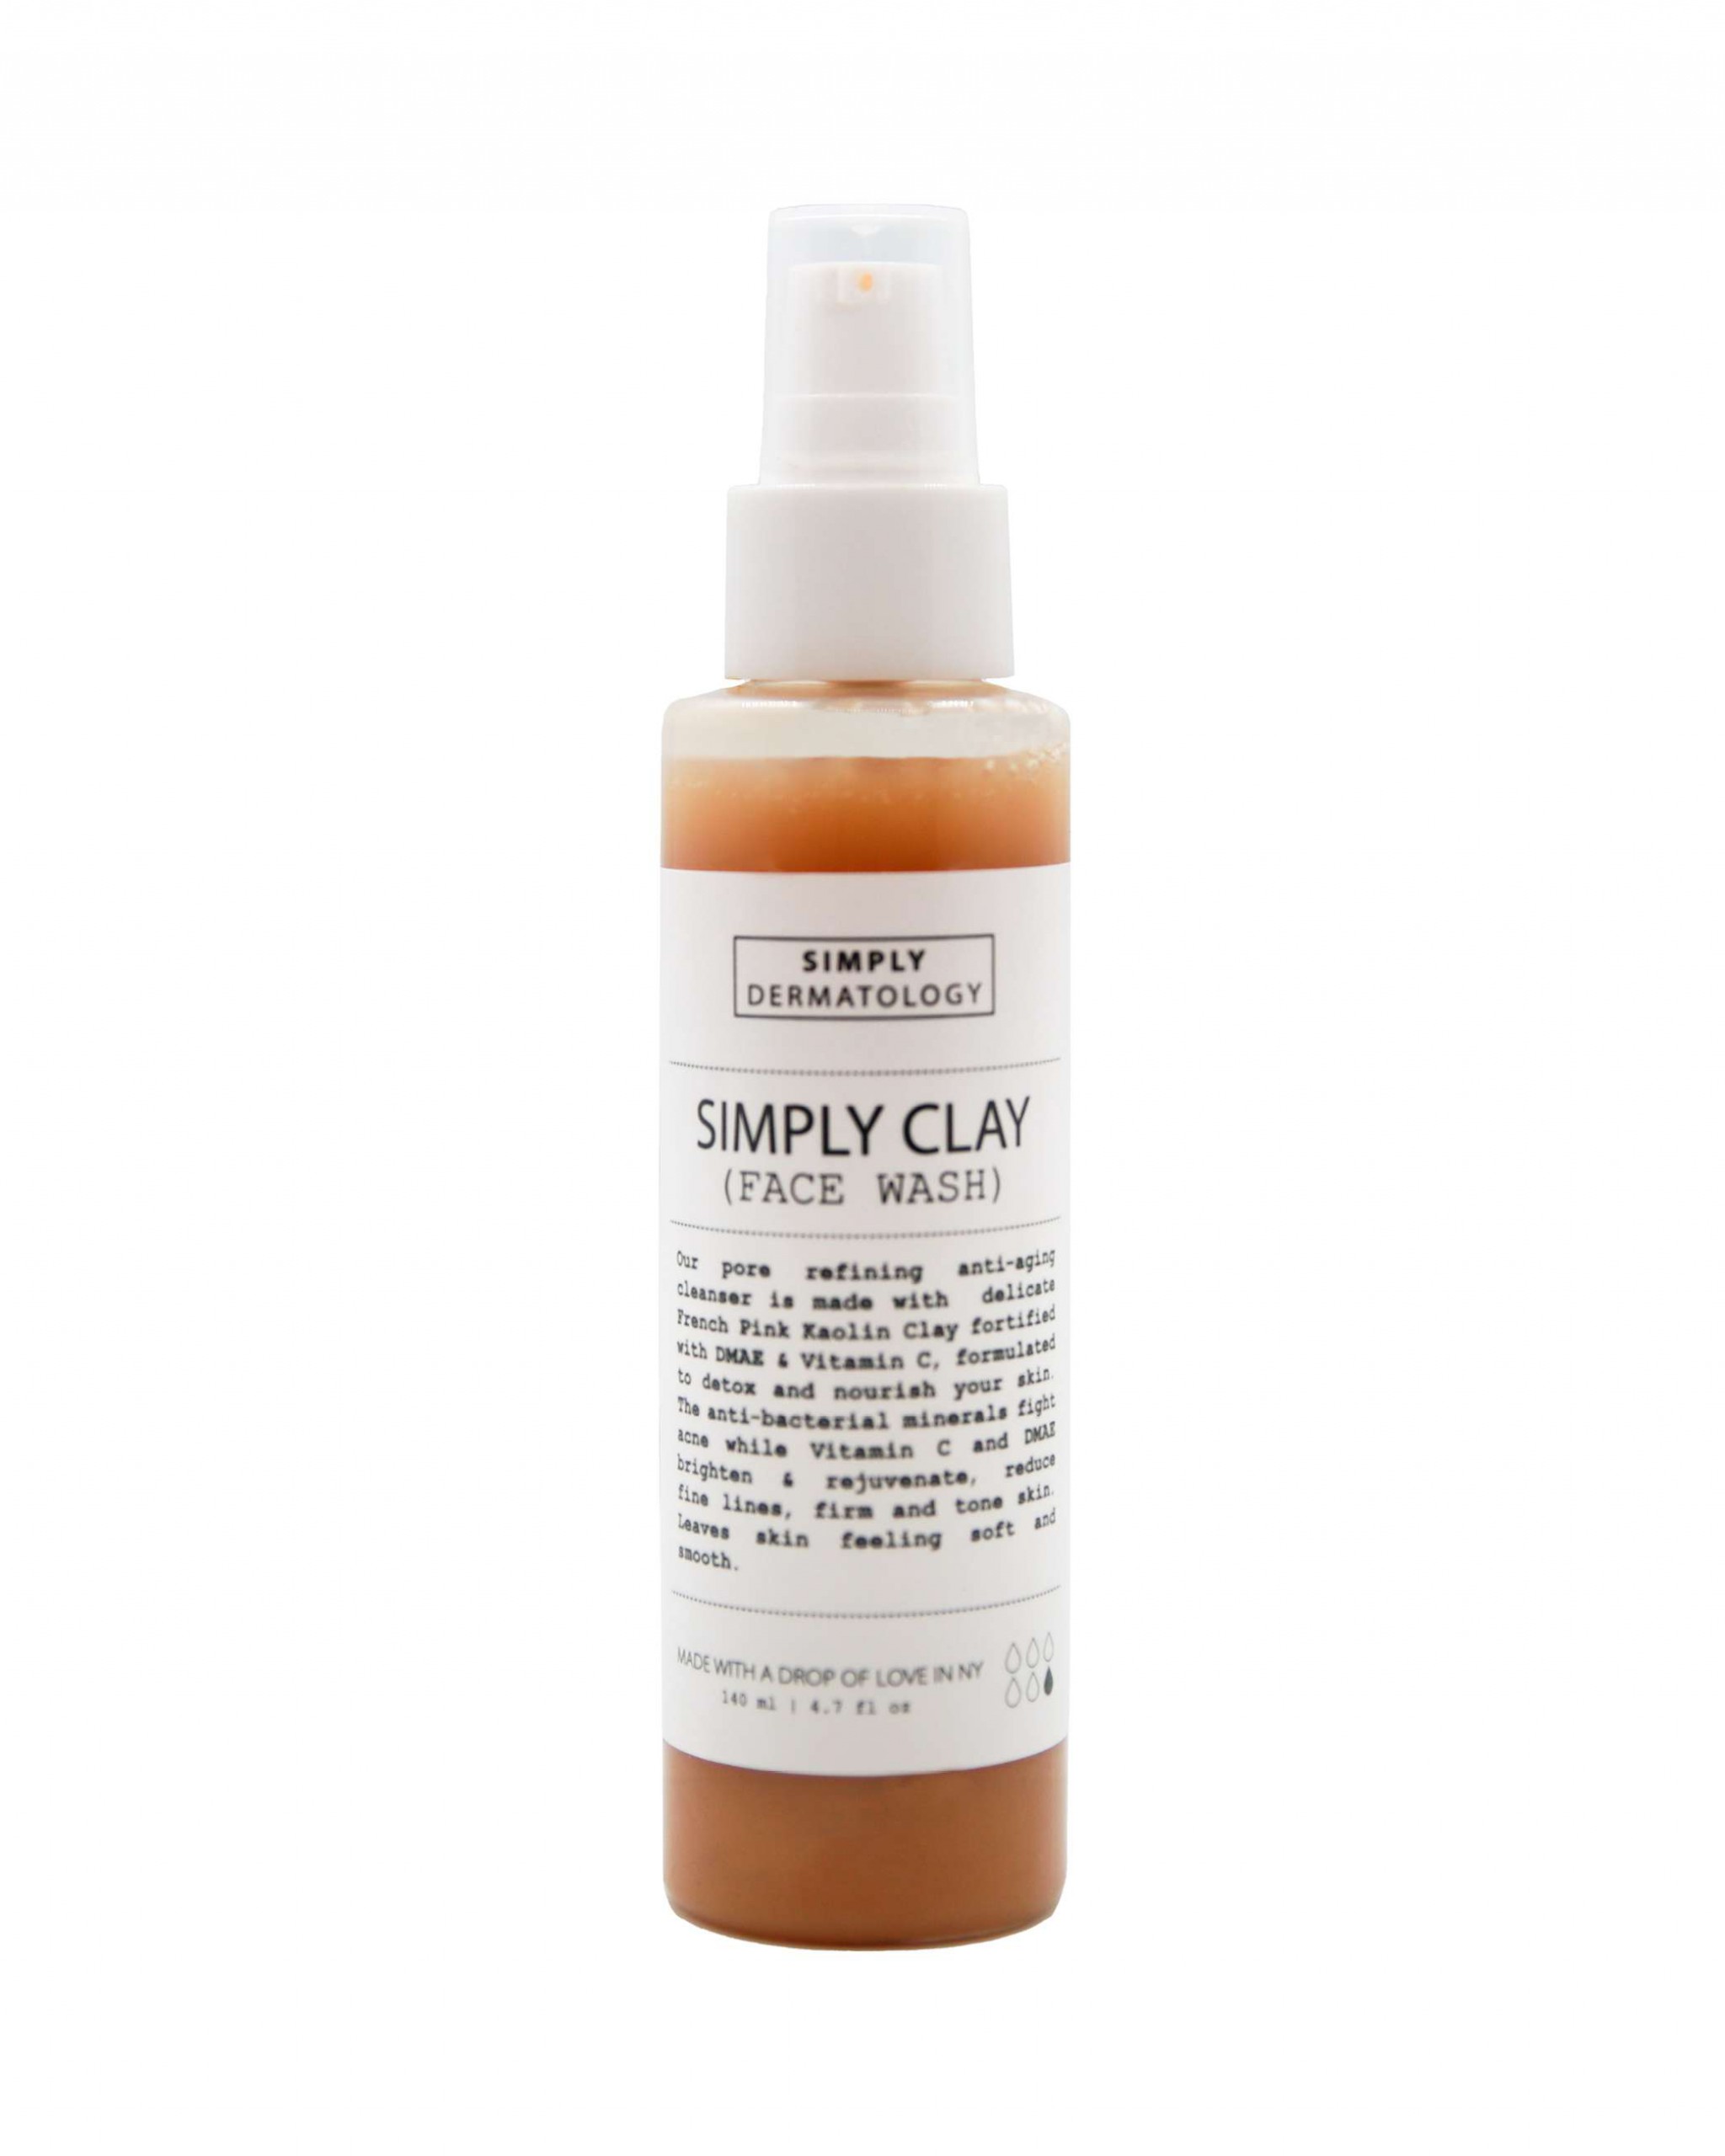 Simply Clay Face Wash bottle